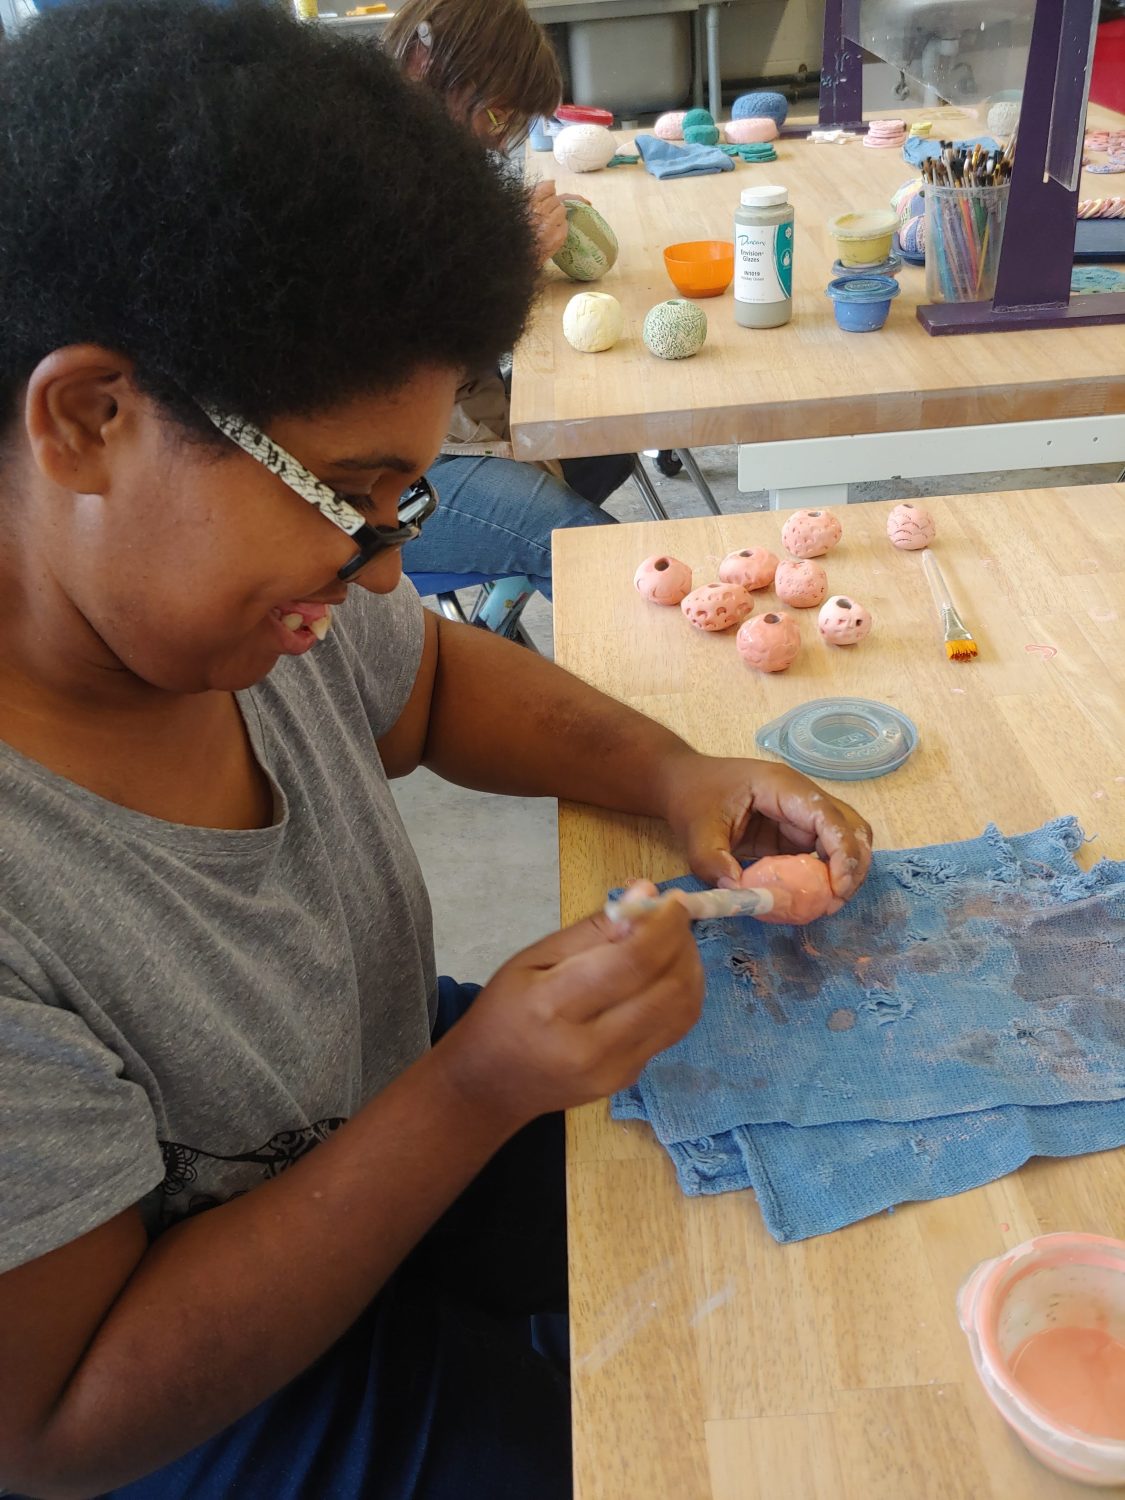 ArtMix participant creates a sculpture from clay